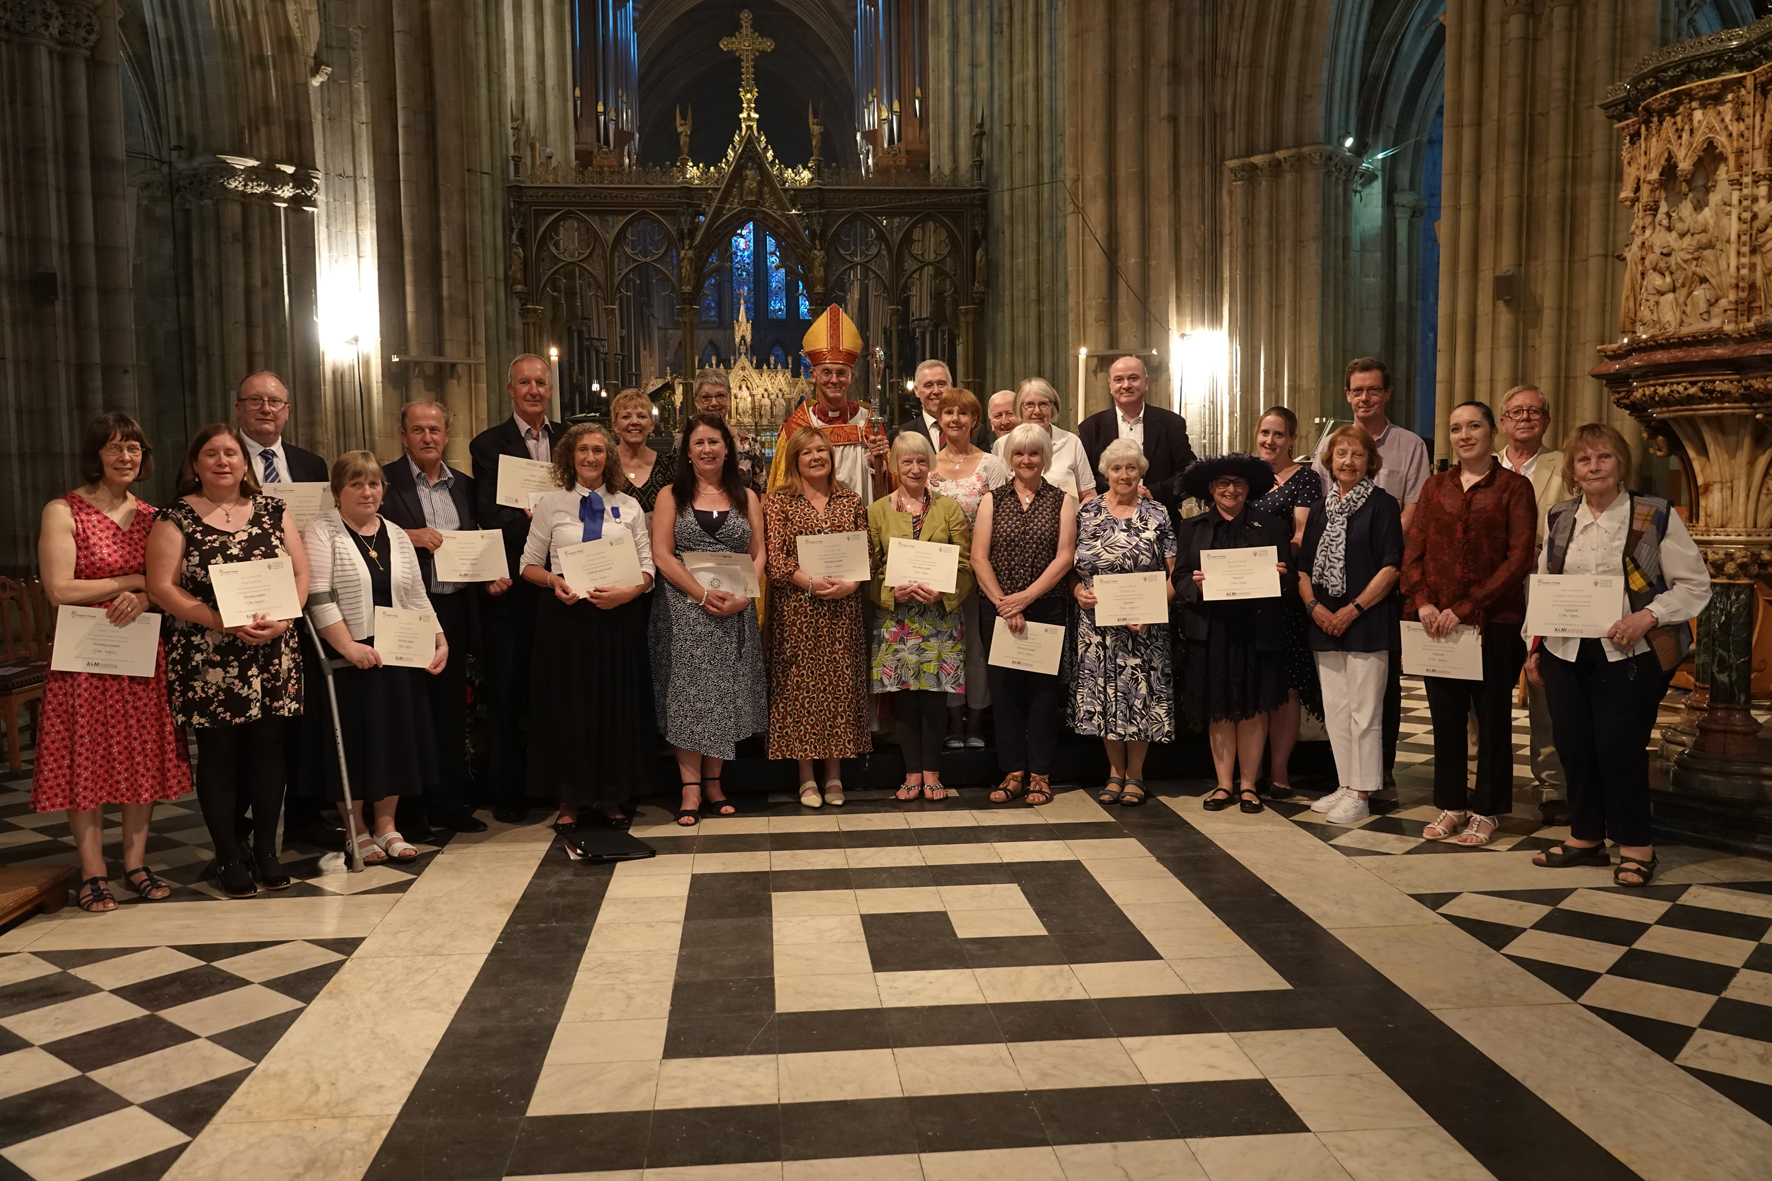 Those presented with their ALM certificates in the cathedral with Bishop John